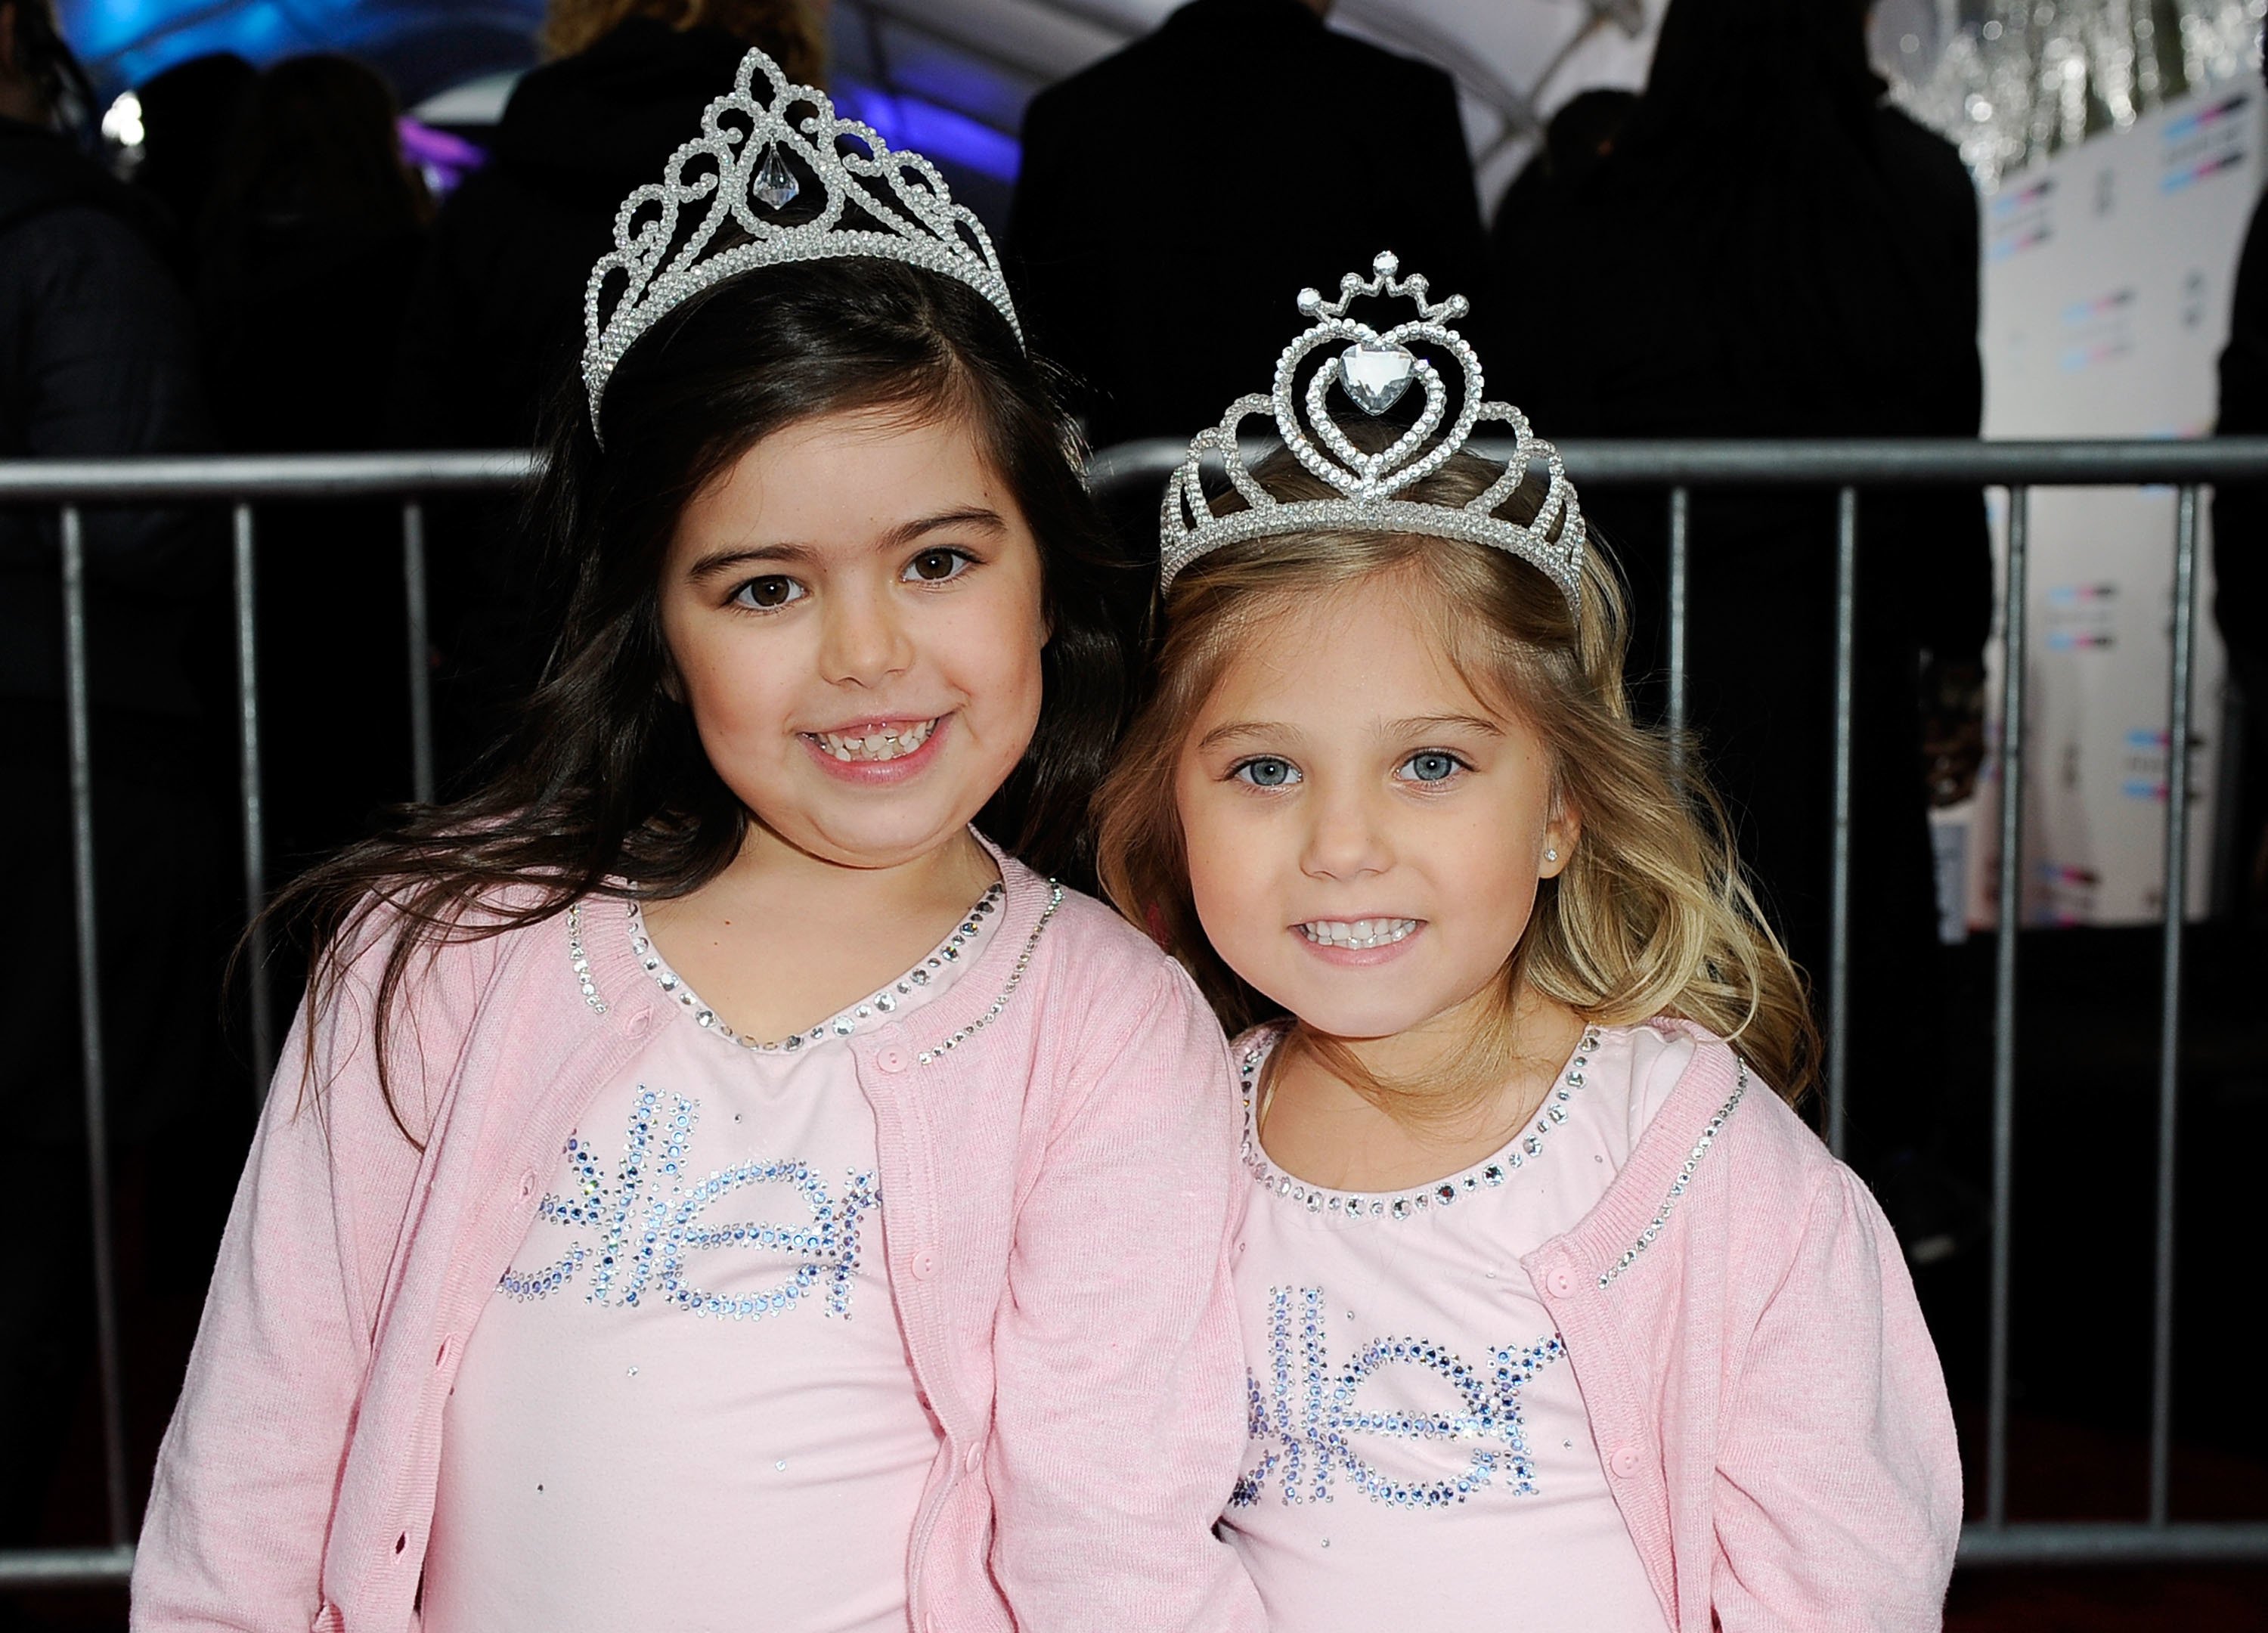 Sophia Grace Brownlee (R) and Rosie Brownlie arrive at the 2011 American Music Awards held at Nokia Theatre L.A. LIVE on November 20, 2011 in Los Angeles, California | Photo: Getty Images 